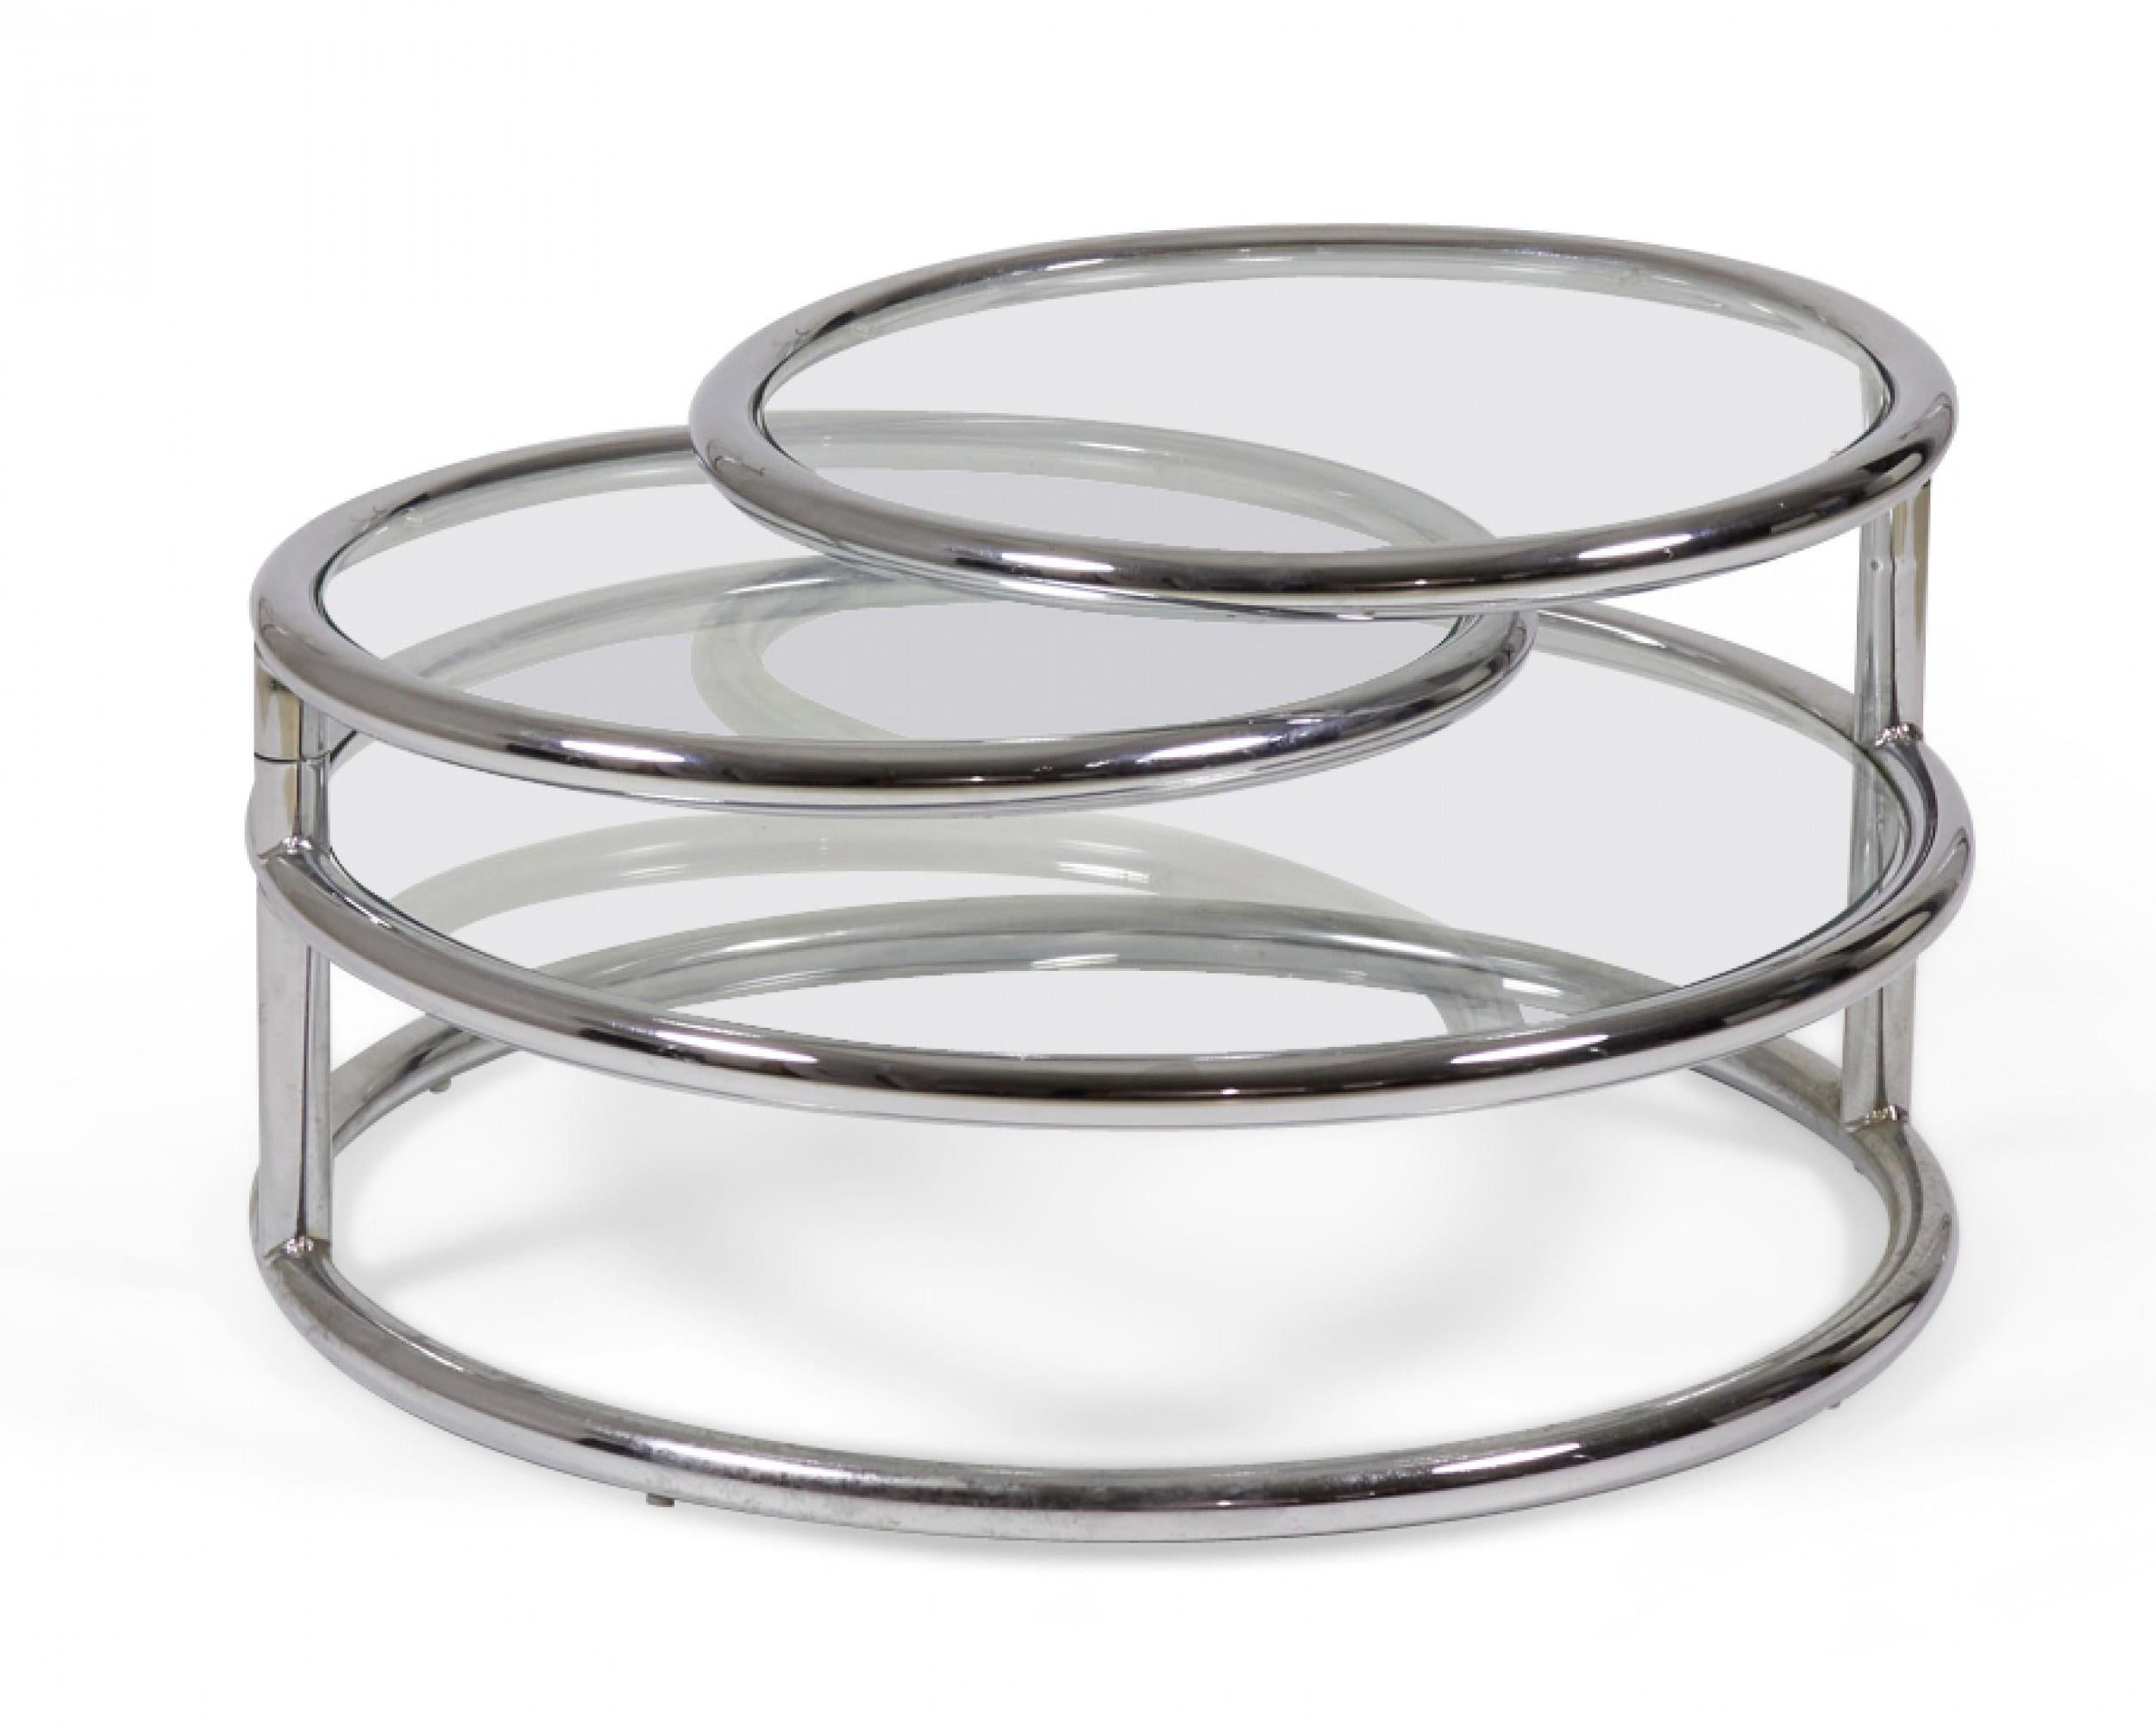 Pair of Morex Italian Mid-Century Space Age Swivel Chrome Cocktail Side Tables For Sale 1